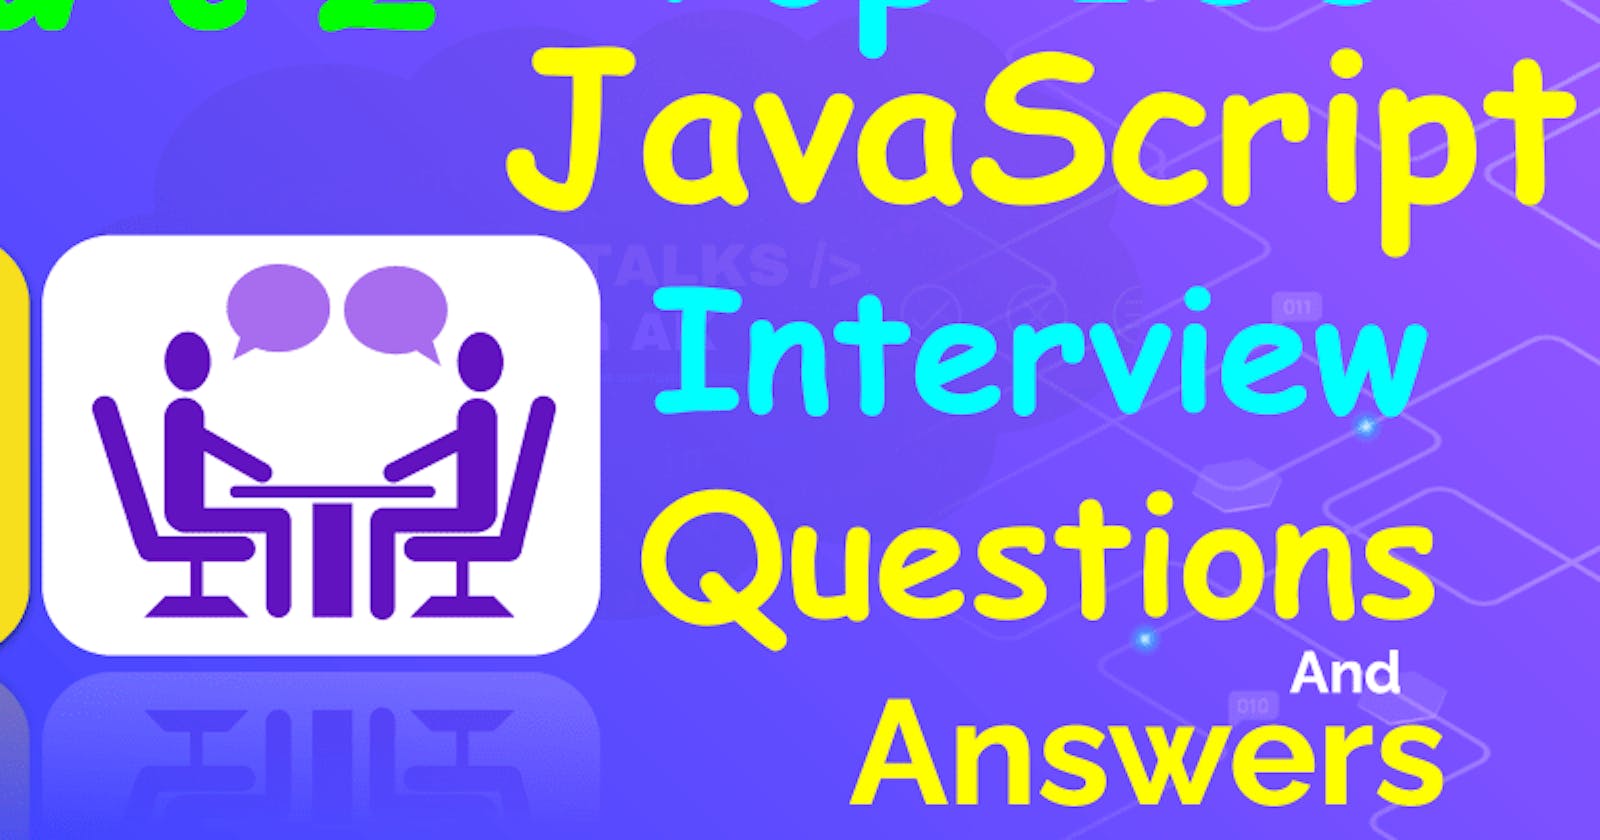 100 most asked JavaScript Interview Questions and Answers - Part 2